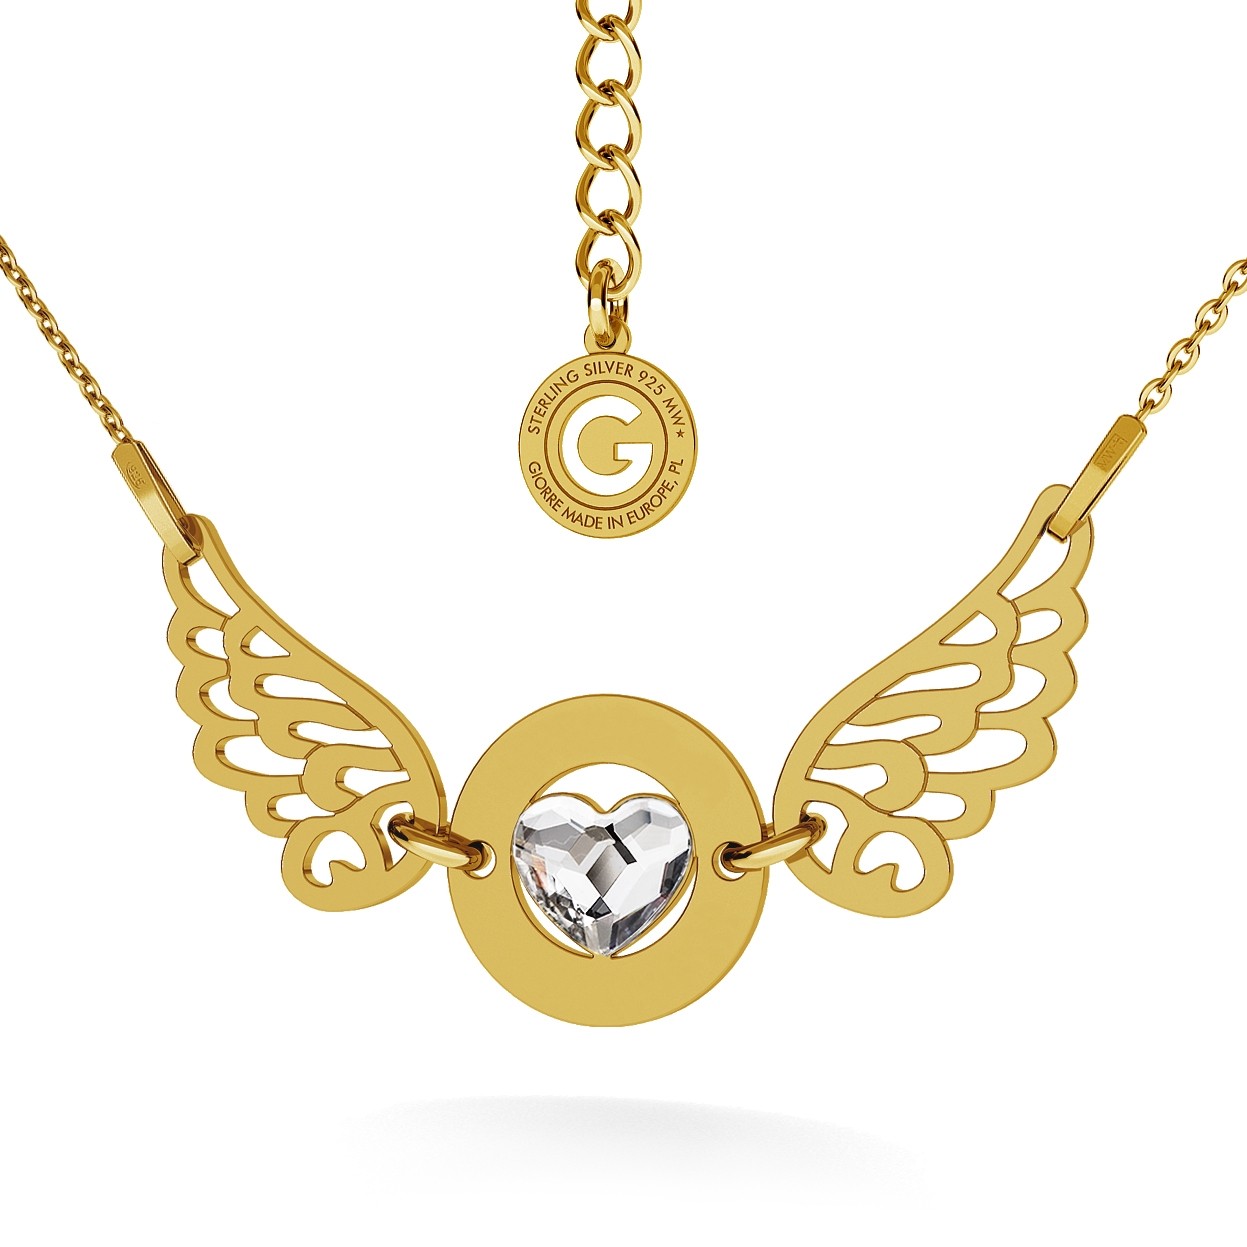 ANGEL HEART NECKLACE, YOUR ENGRAVE, SWAROVSKI 2808, RHODIUM OR 24K / 18K GOLD PLATED